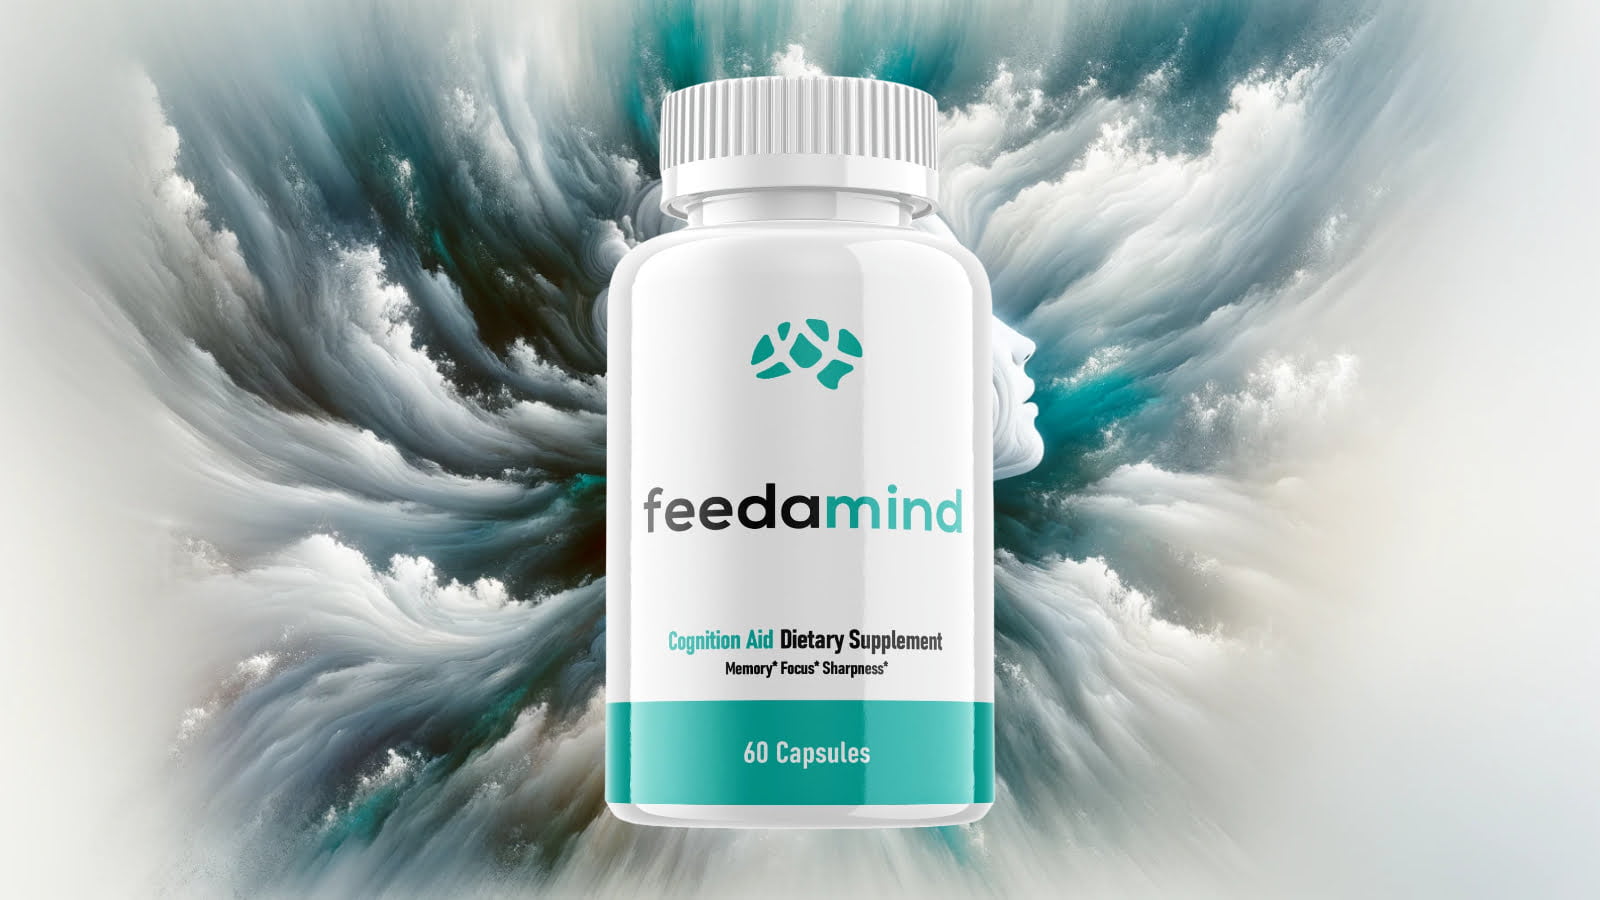 An artistic depiction of intellectual nourishment and expansion inspired by Feedamind.